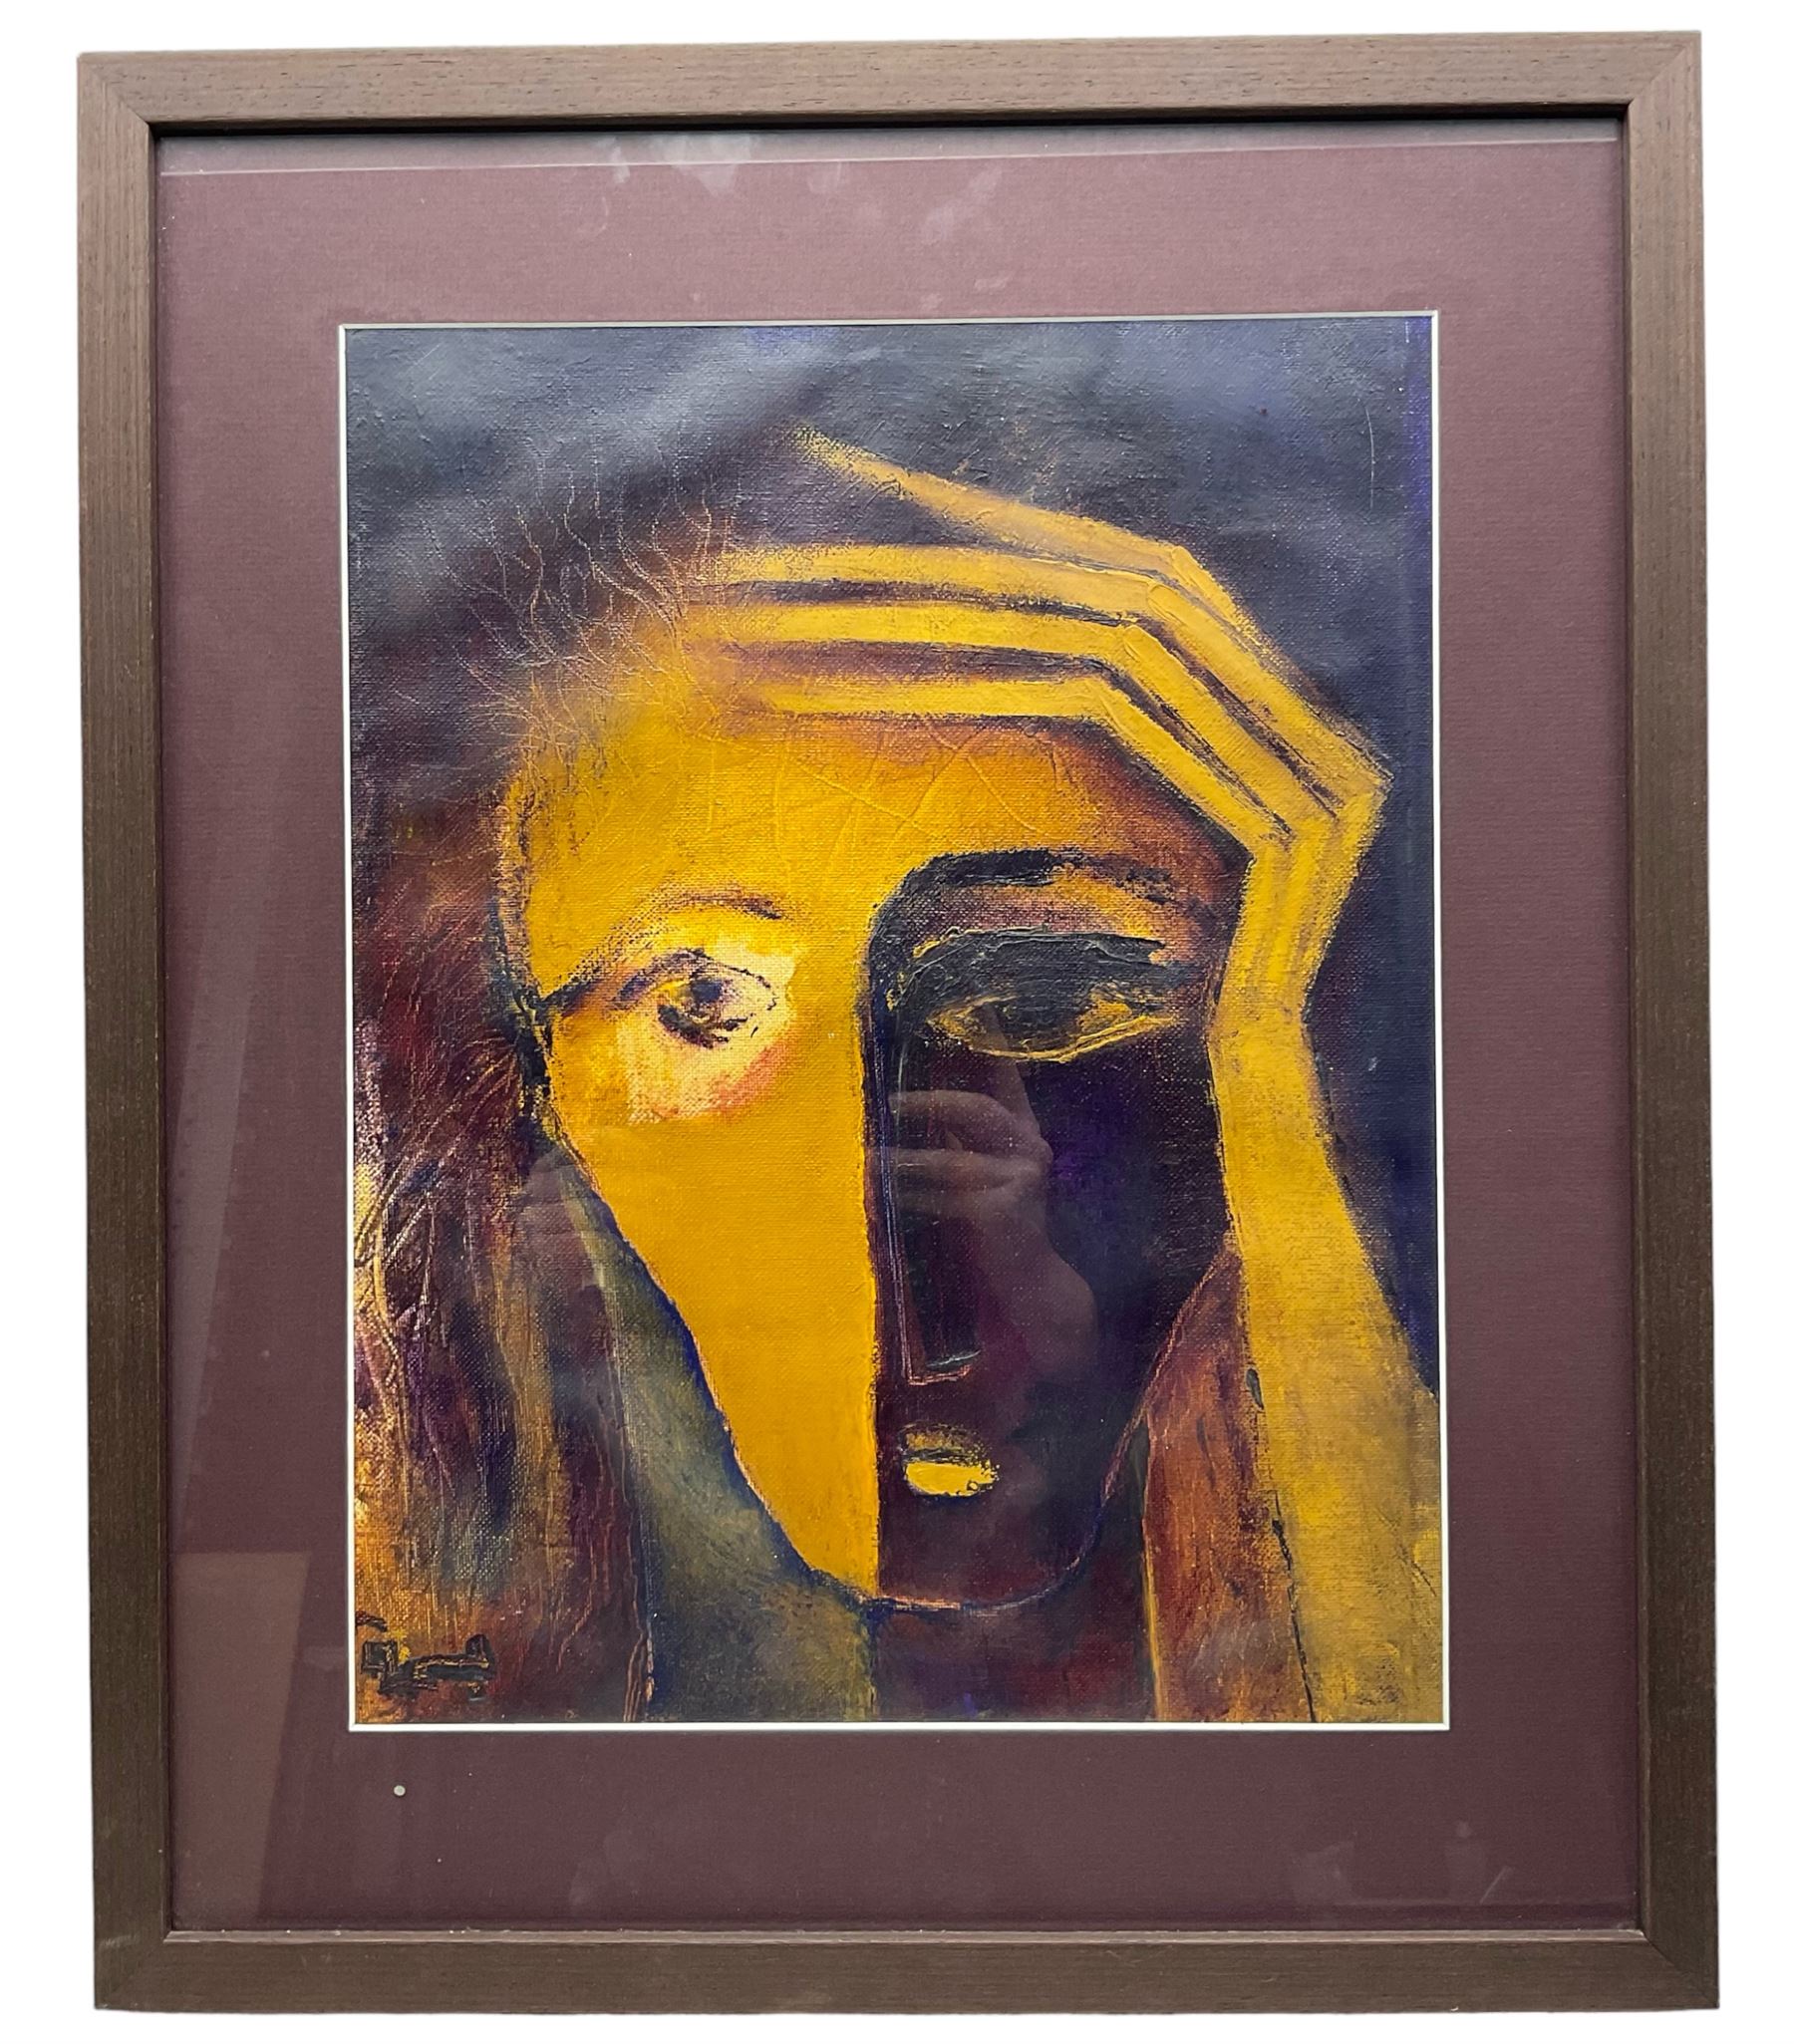 Continental School (Contemporary): Abstract Portrait of Despair - Image 2 of 2